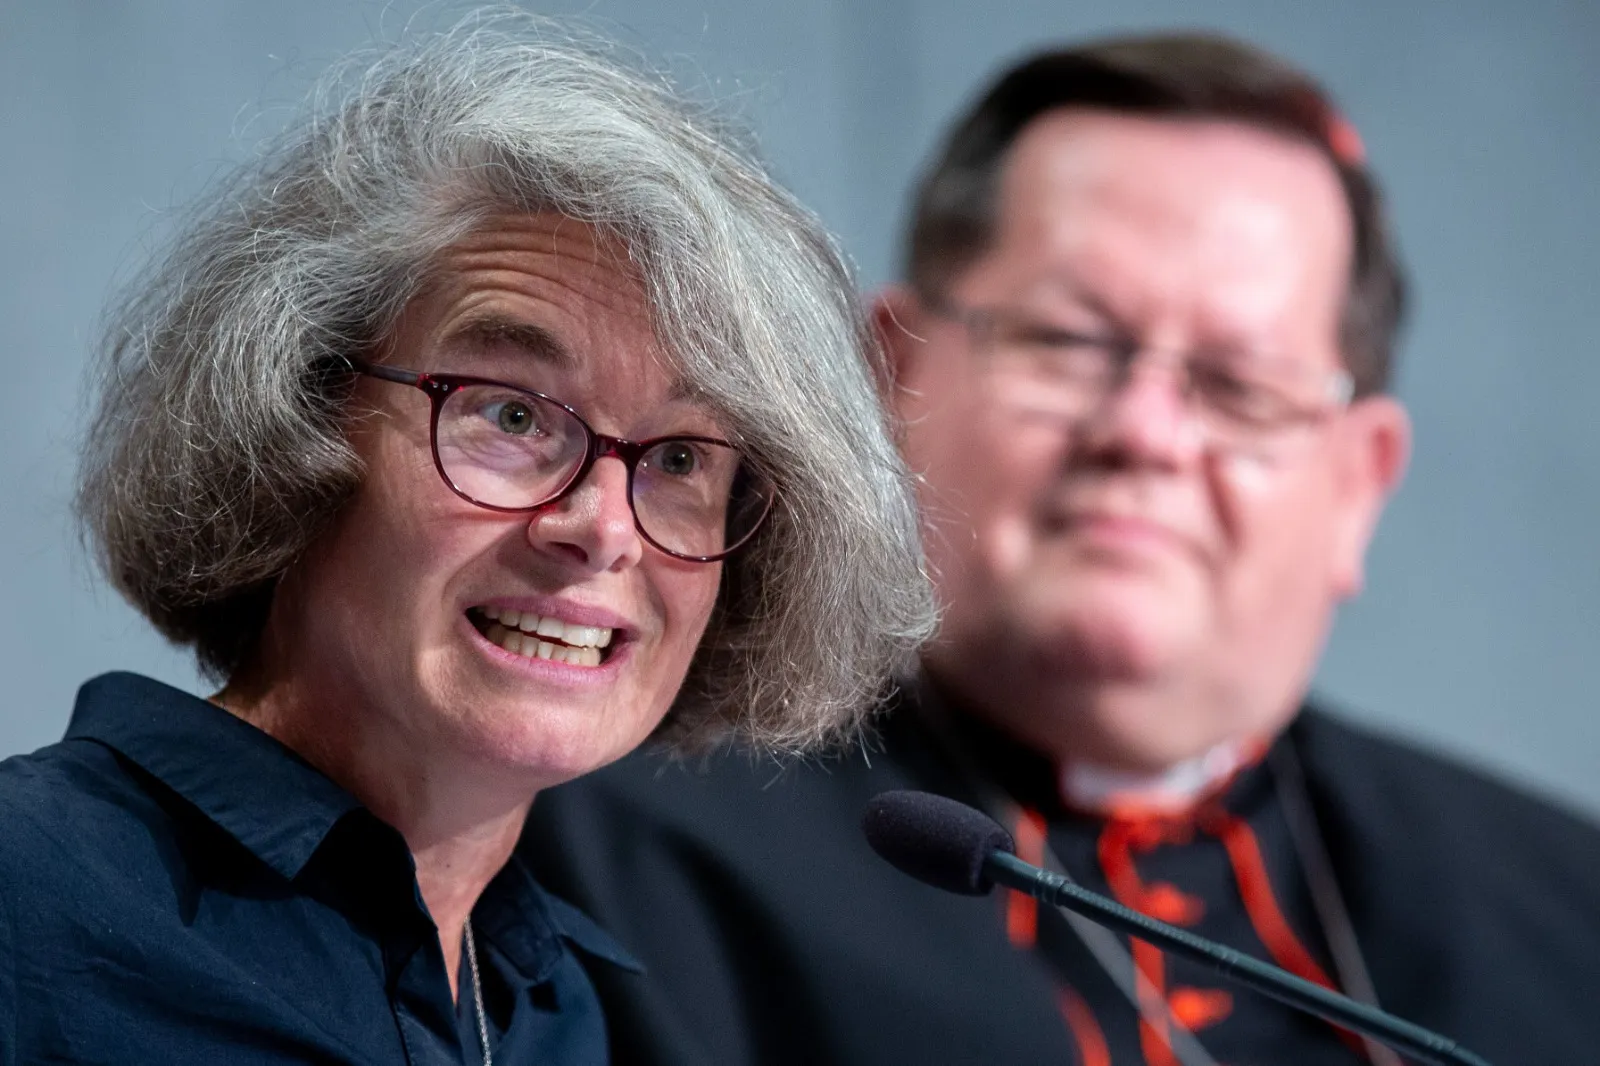 Sister Nathalie Becquart, who serves as an undersecretary for the Church’s ongoing Synod on Synodality, was recently named on the BBC’s list of 100 inspiring and influential women around the world.?w=200&h=150